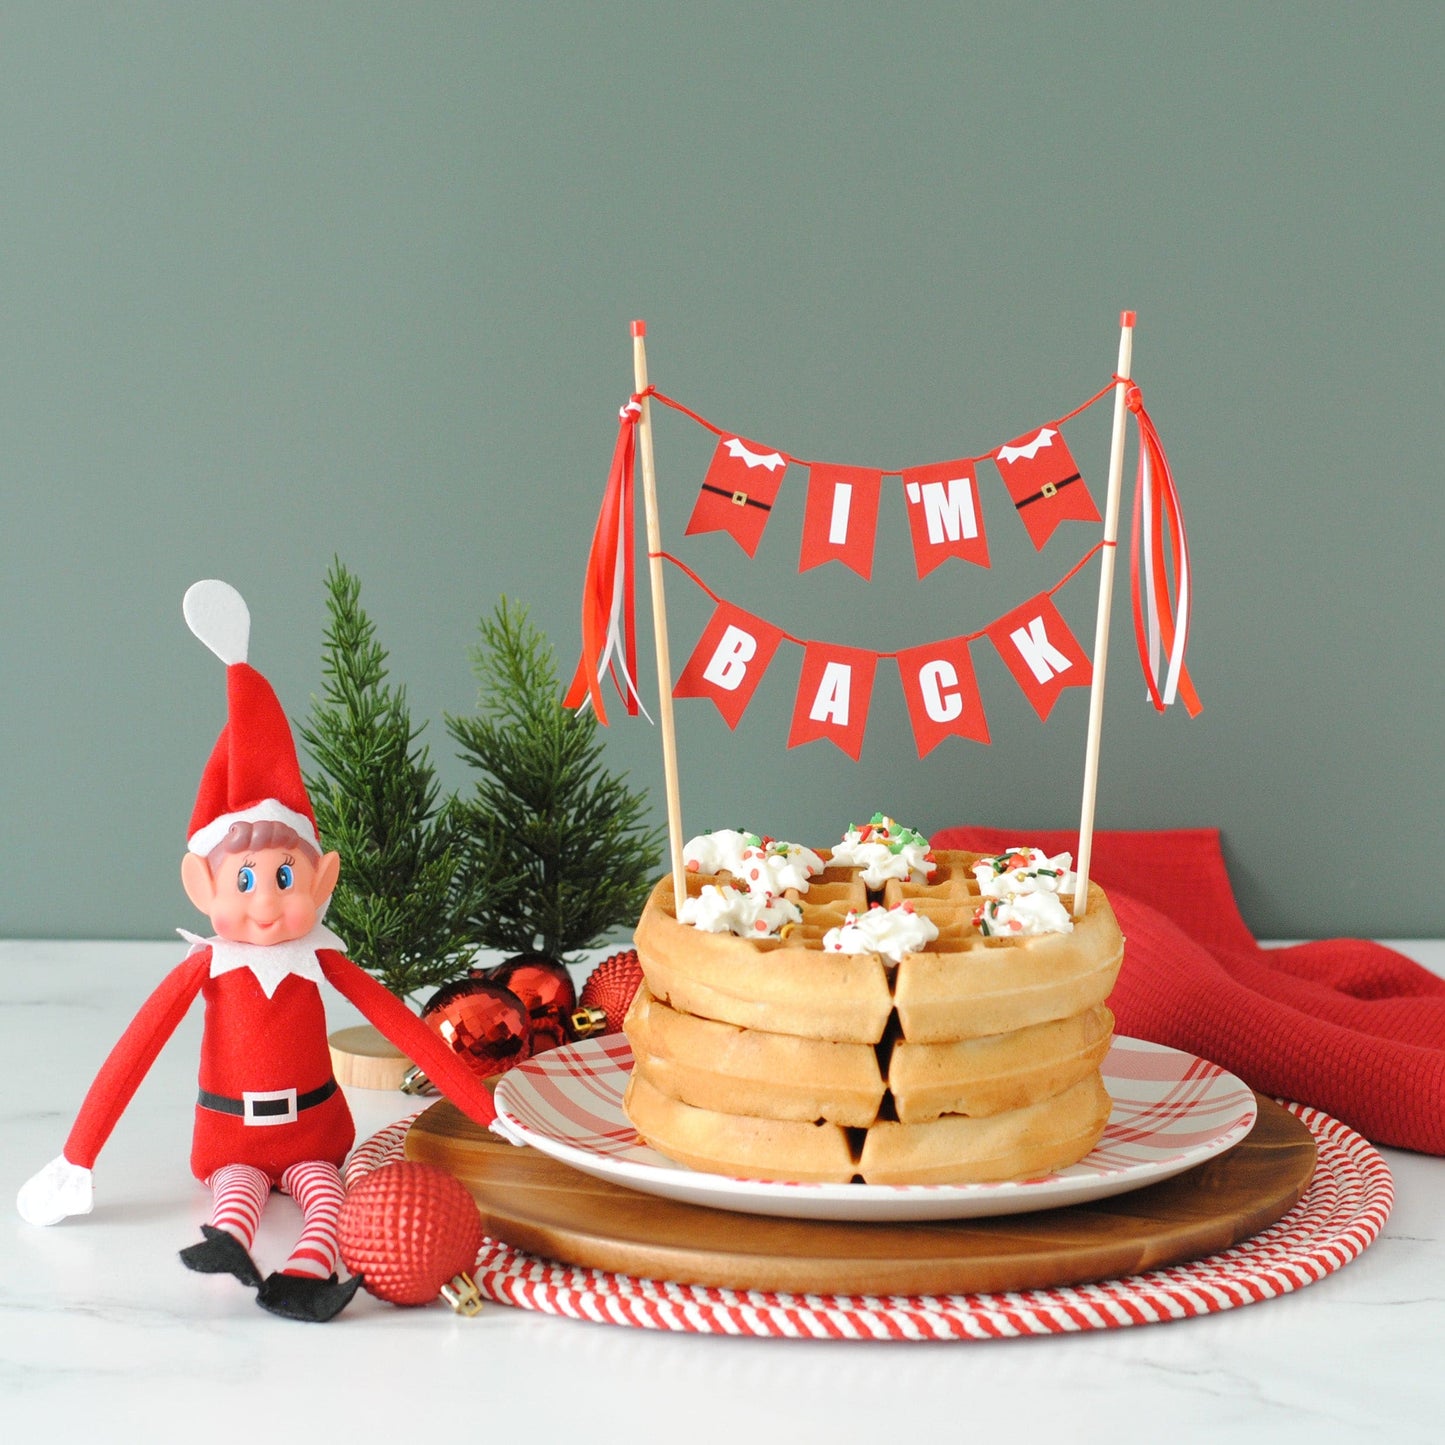 I'm Back Cake topper for Welcome back breakfast for christmas elf | cake toppers by Avalon Sunshine